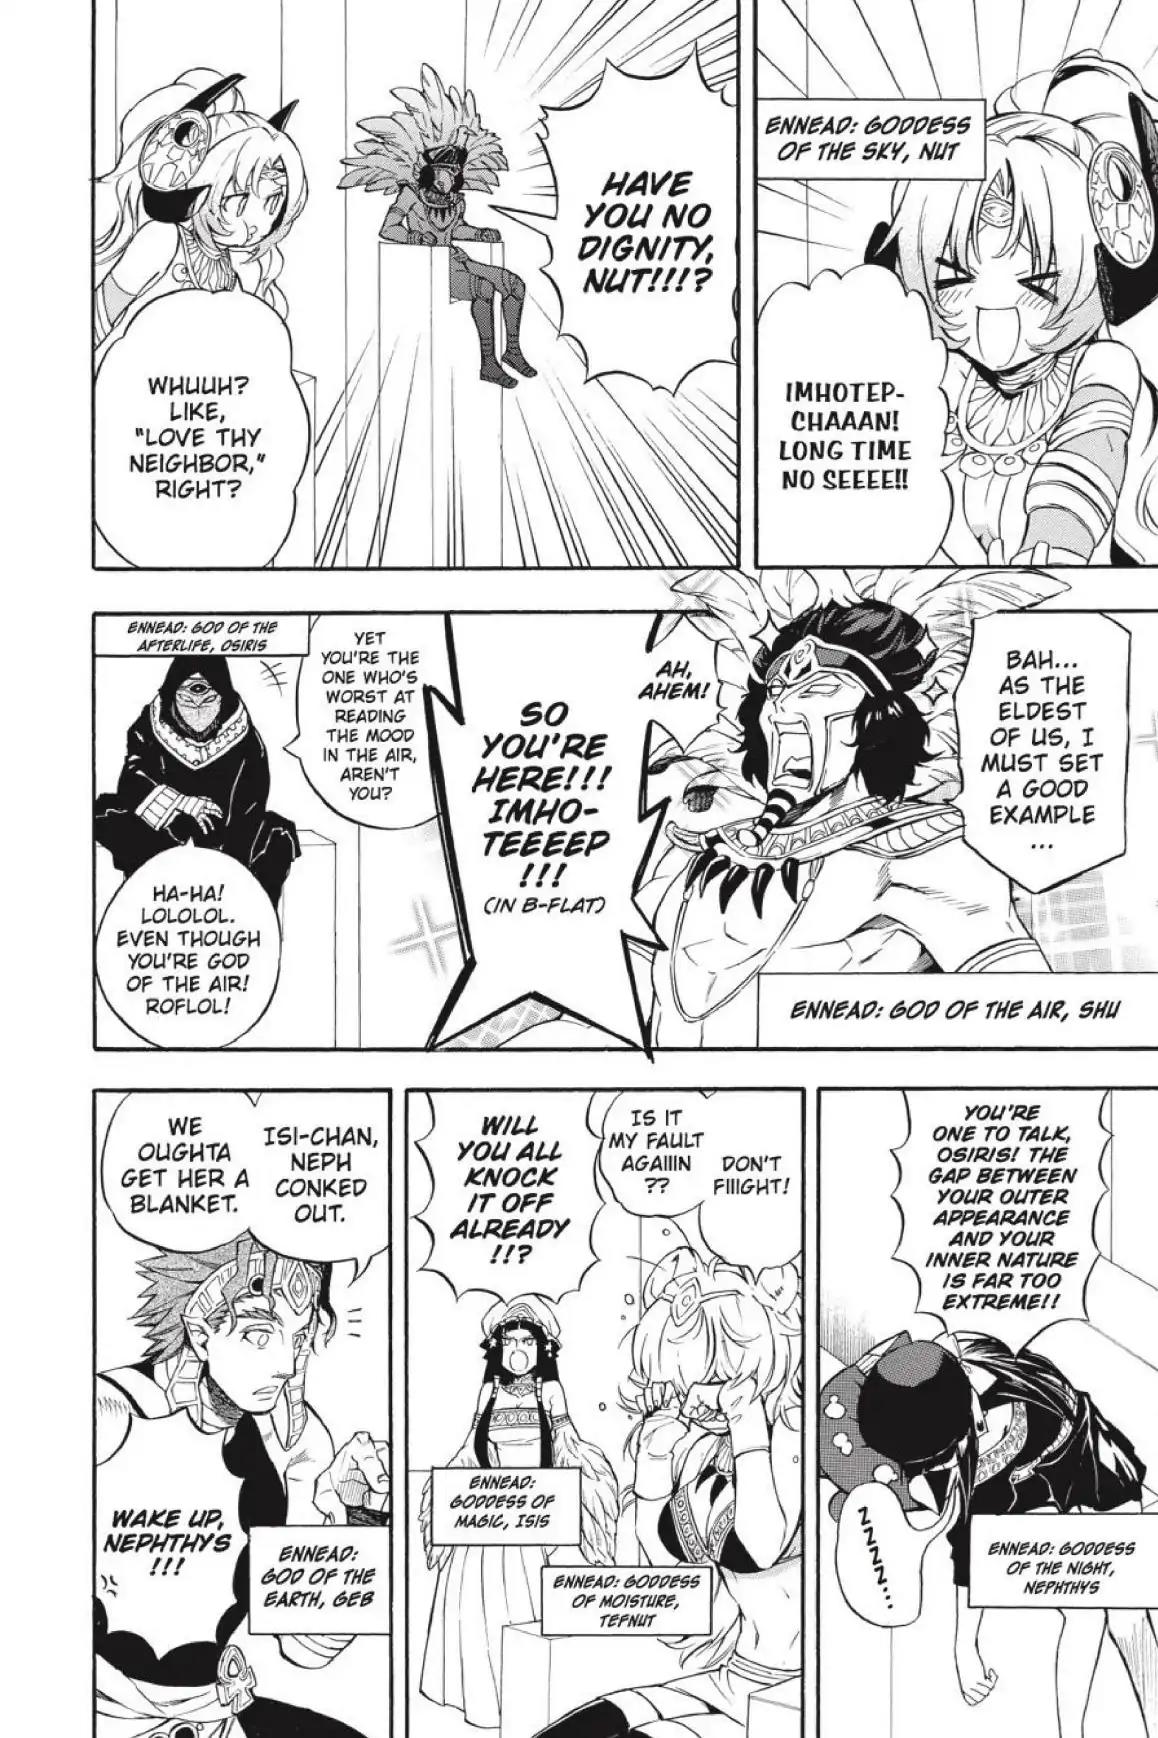 Im - Great Priest Imhotep Vol.9 Chapter 33